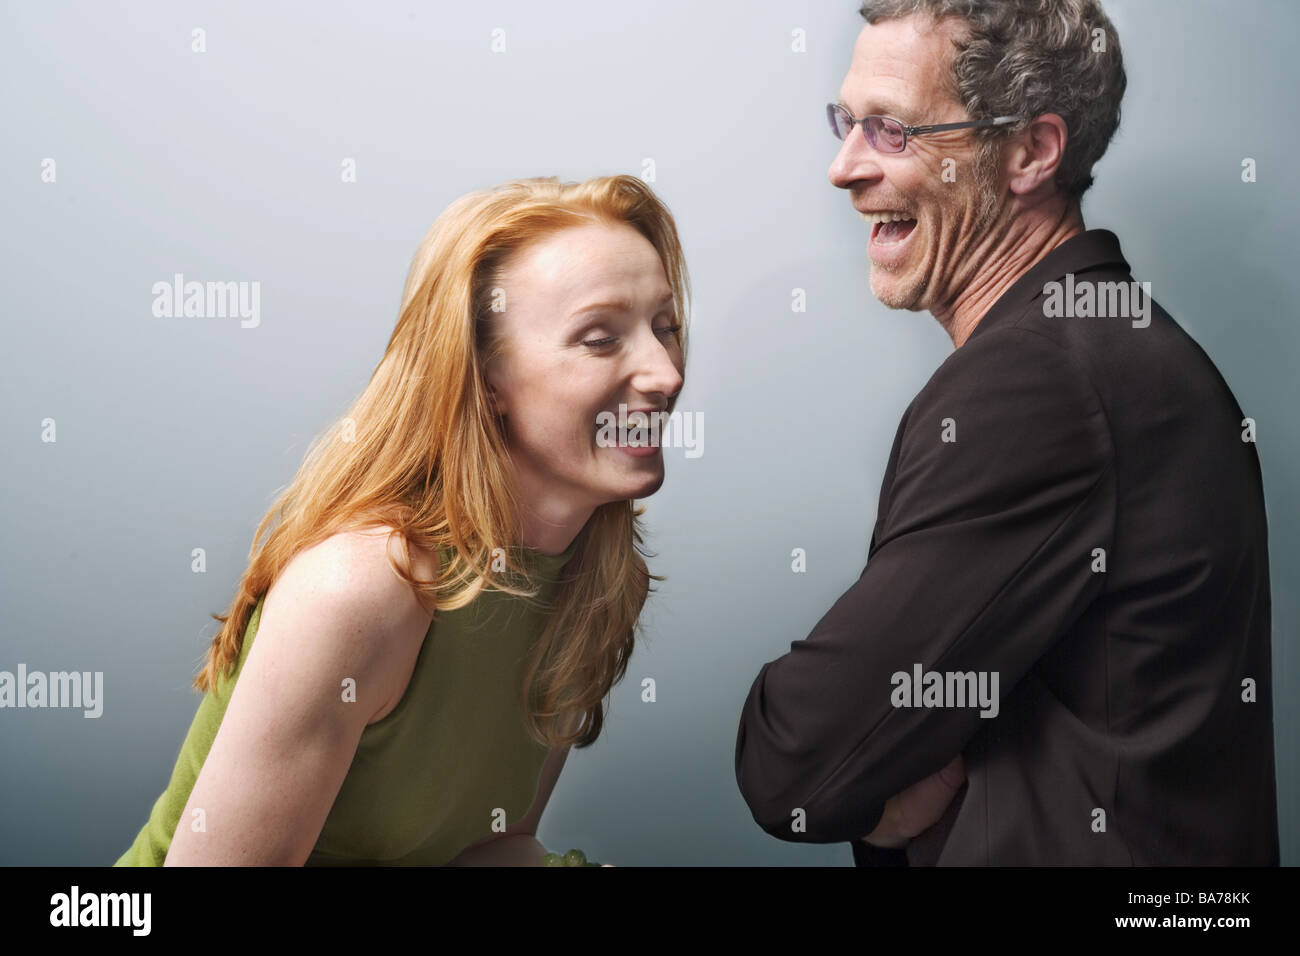 Mate cheerfully laughs semi-portrait broached series people two 20-30 years 40-50 years ages old-age-difference adults Stock Photo